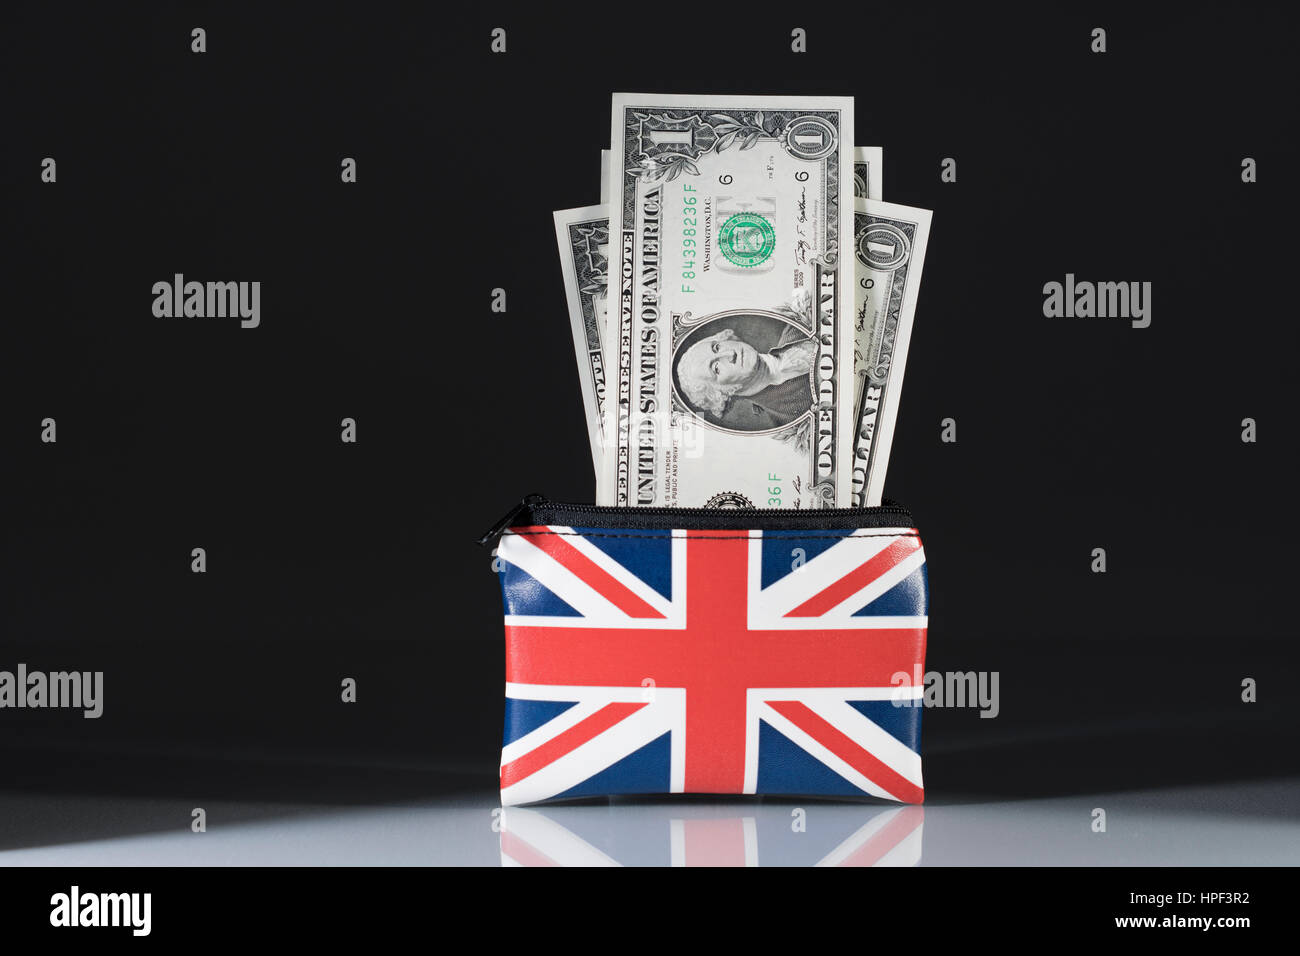 Union Jack coin purse with US Dollars set against dark background. Metaphor US Dollar-Sterling exchange rate and trade, holiday spending money in US. Stock Photo